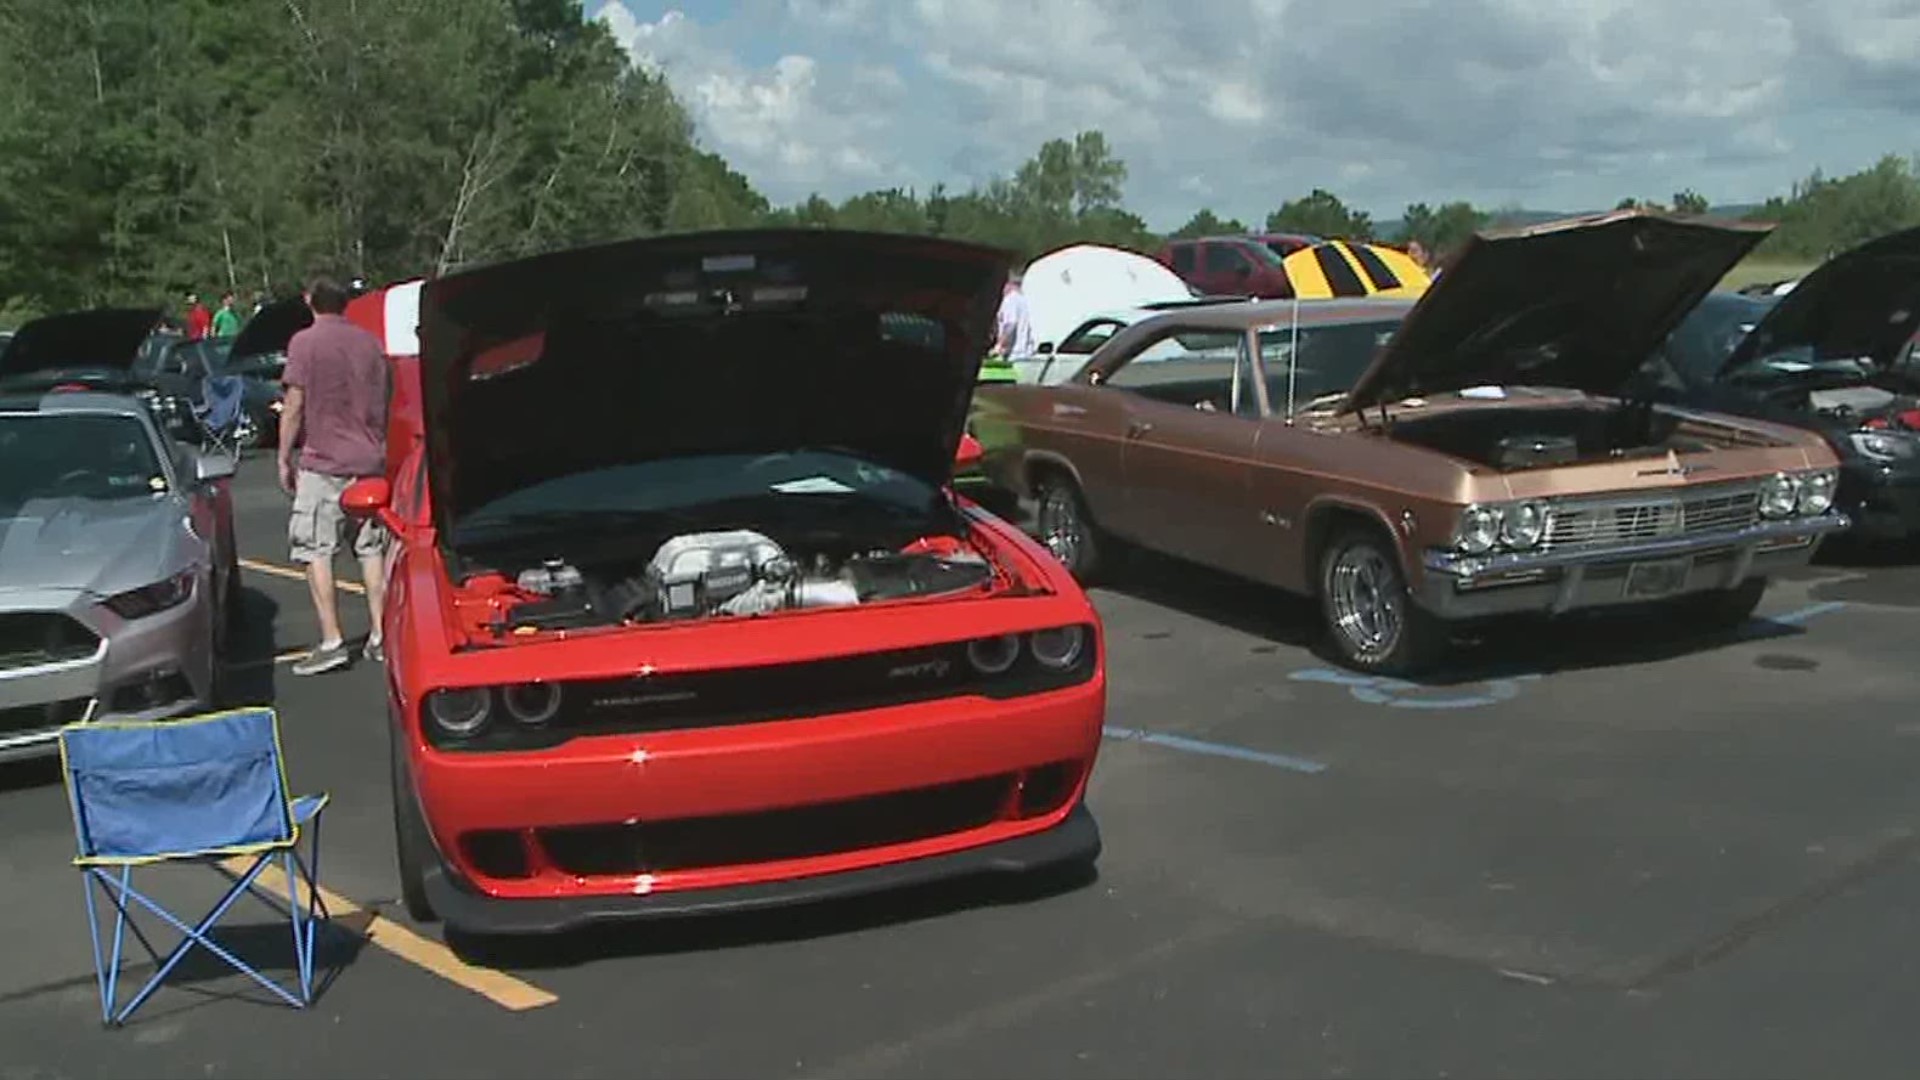 Miller-Keystone Blood Center near Pittston hosted a free car show Sunday.